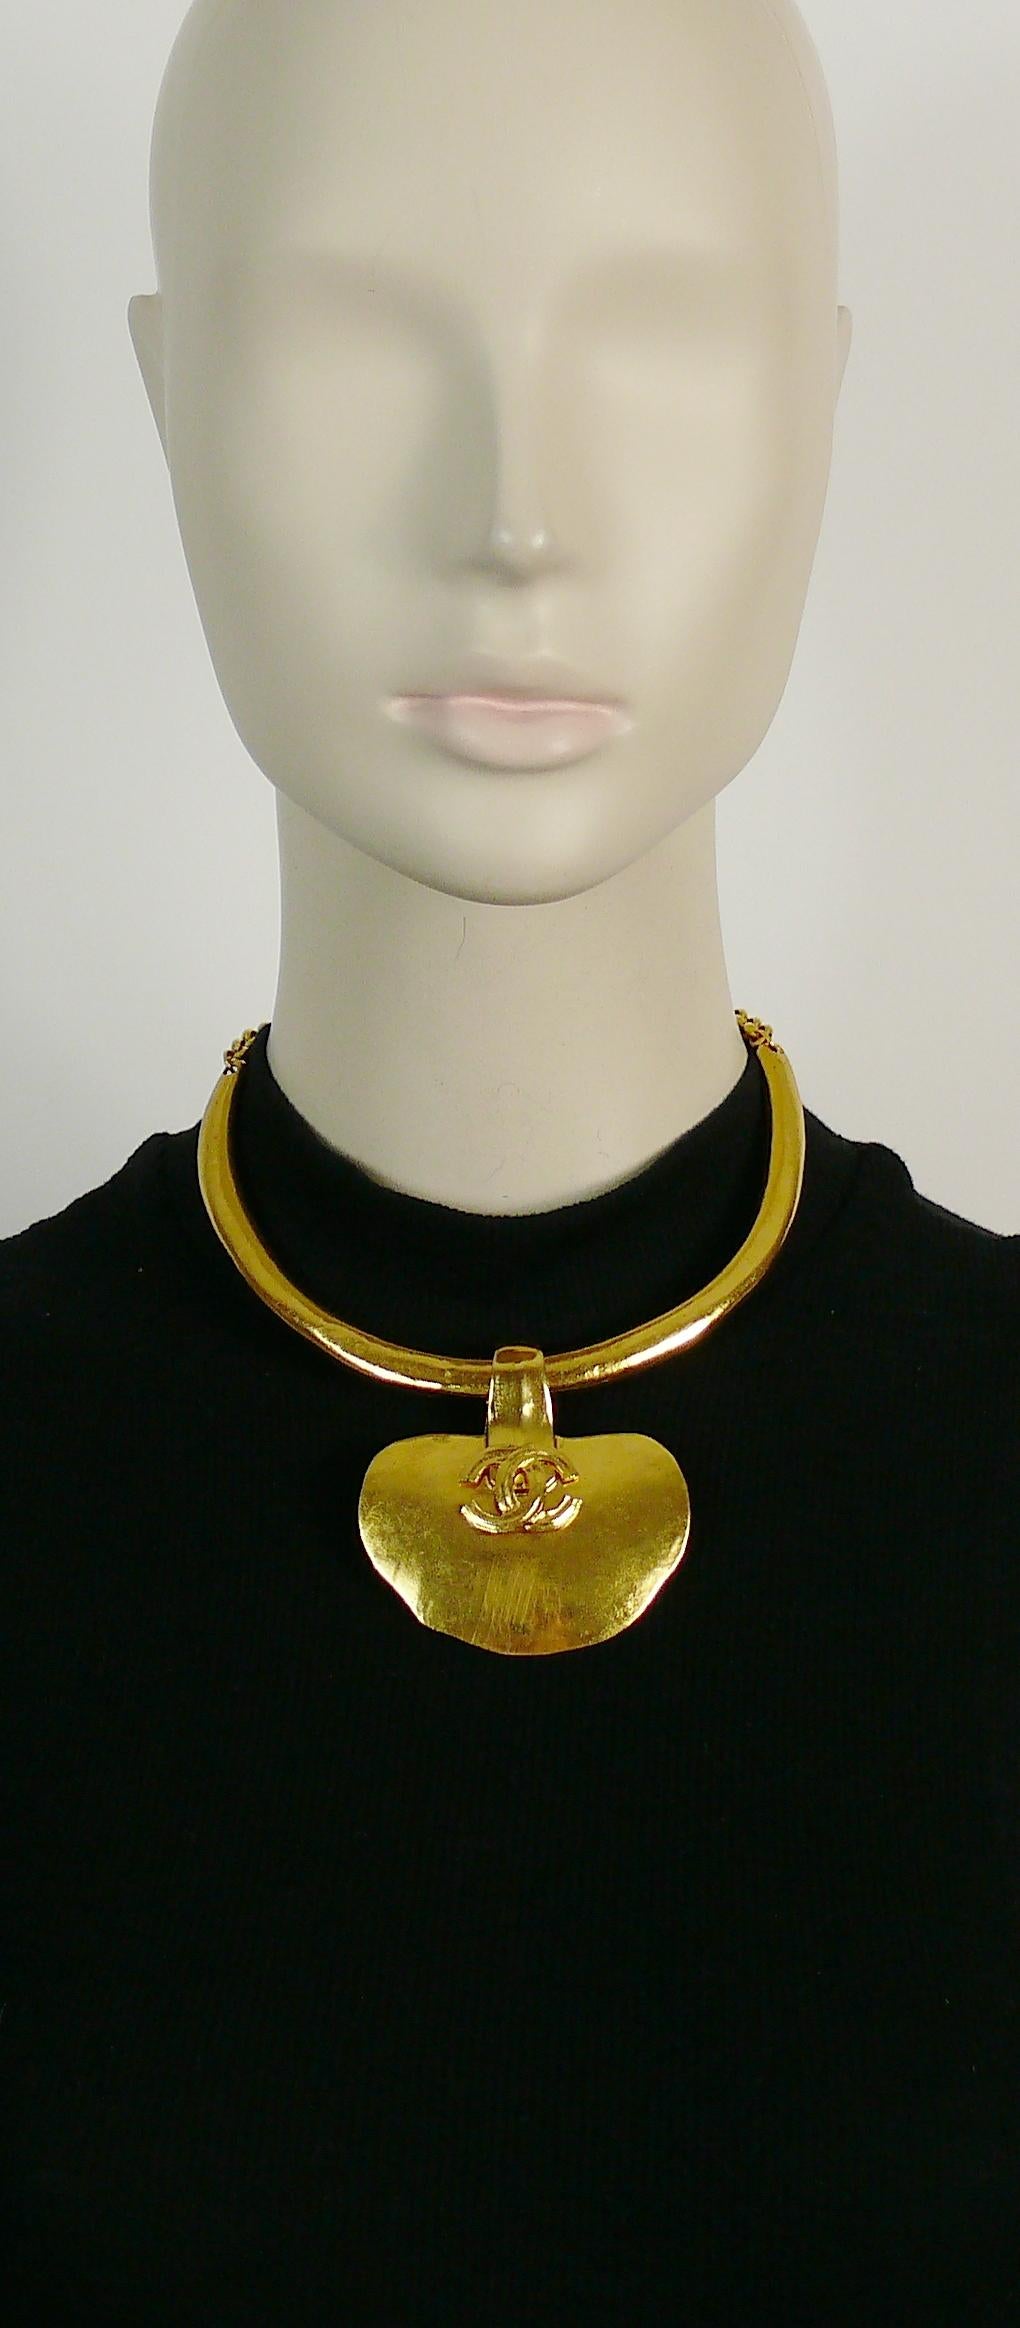 CHANEL vintage rare 1998 gold toned textured torque necklace featuring a large irregular shaped pendant with CC logo at center.

Hook clasp closure.
Extension chain with CC charm.

Spring/Summer 1998 Collection.

Marked CHANEL 98 P MADE IN